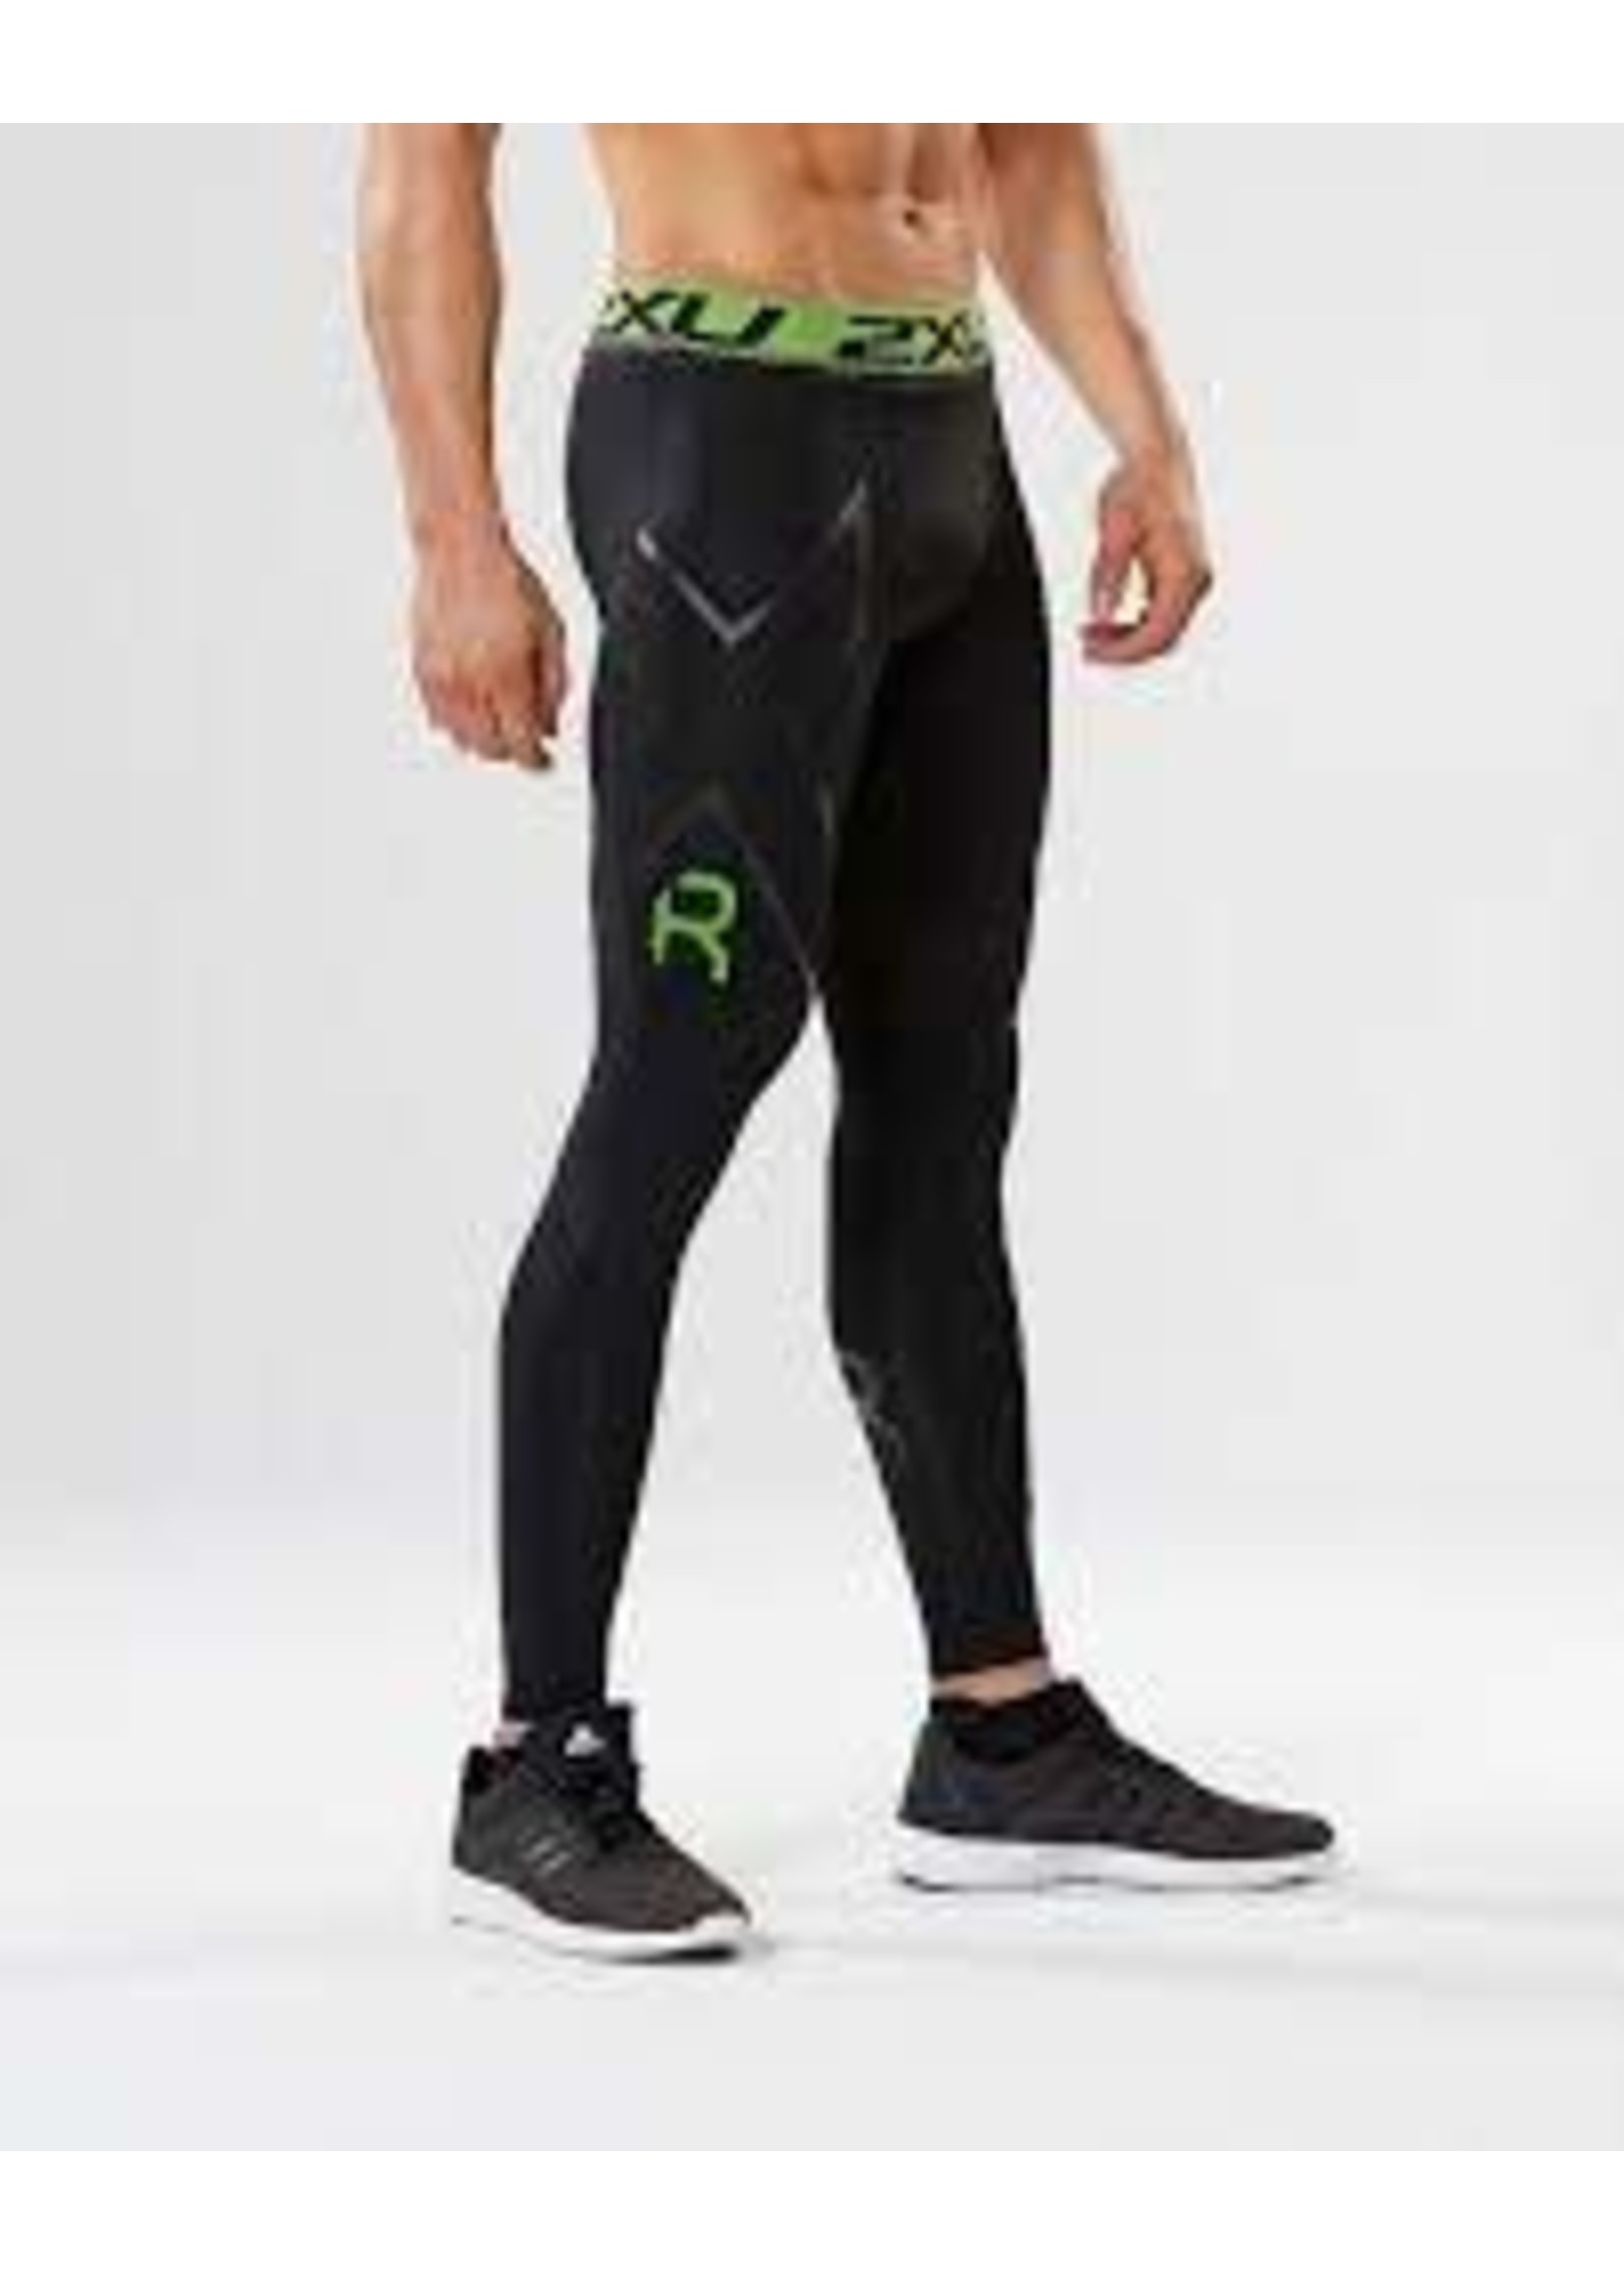 2XU Men's Refresh Recovery Compression Tights